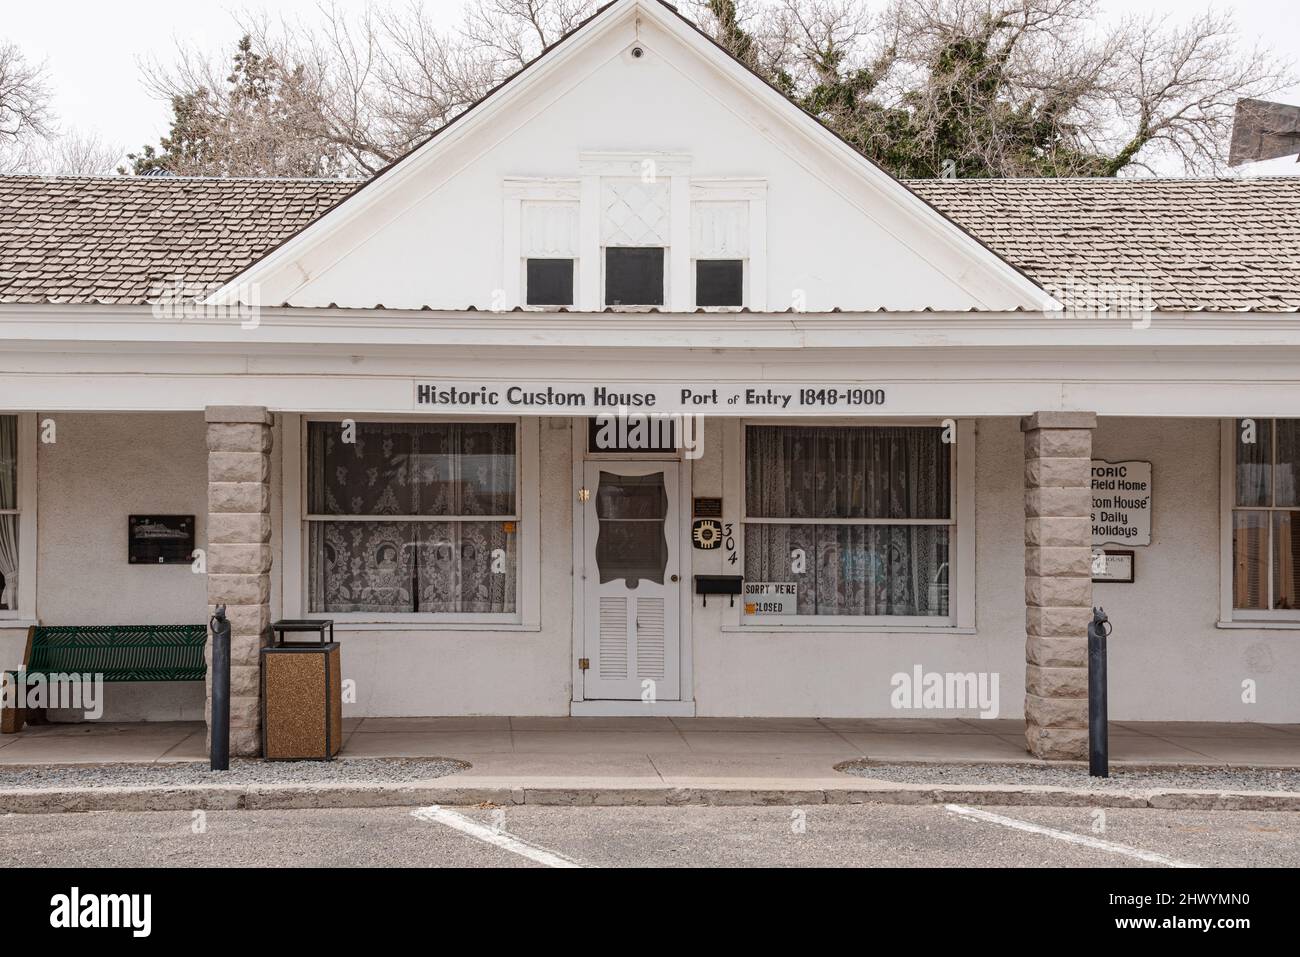 The Historic Custom House Port of Entry in Deming, New Mexico. Stock Photo